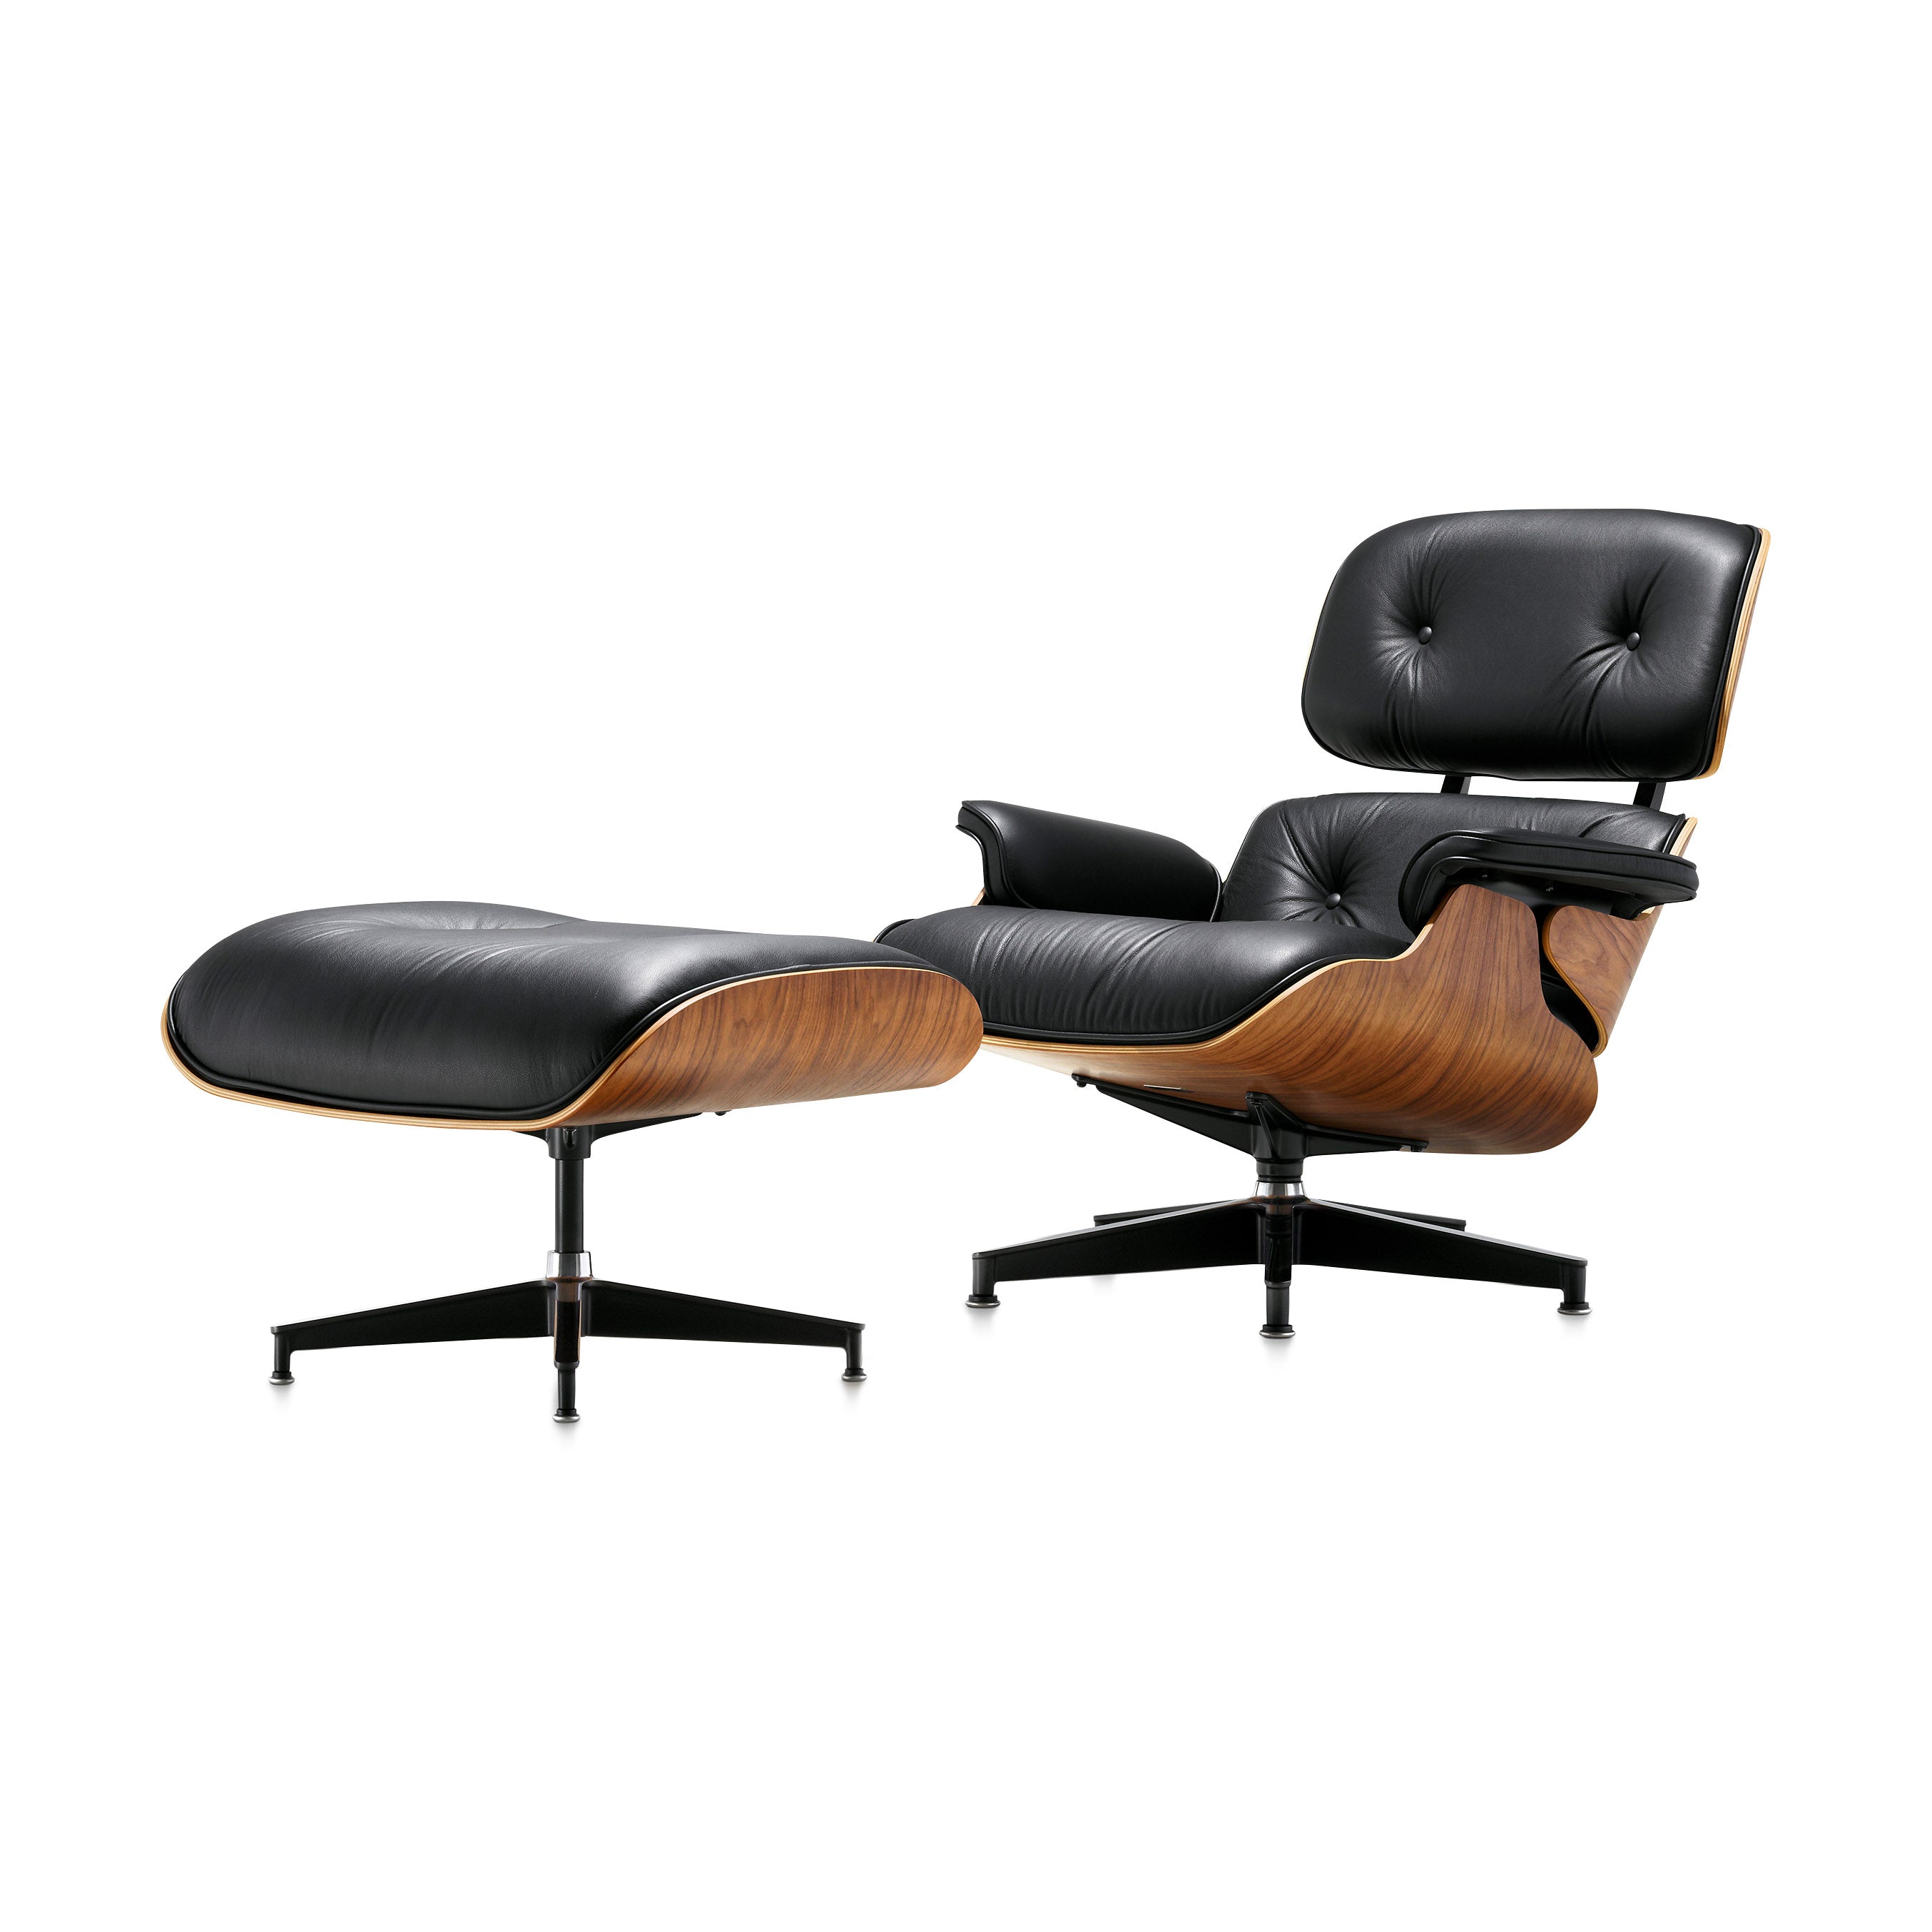 Eames® Lounge Chair and Ottoman from Herman Miller - Walnut 